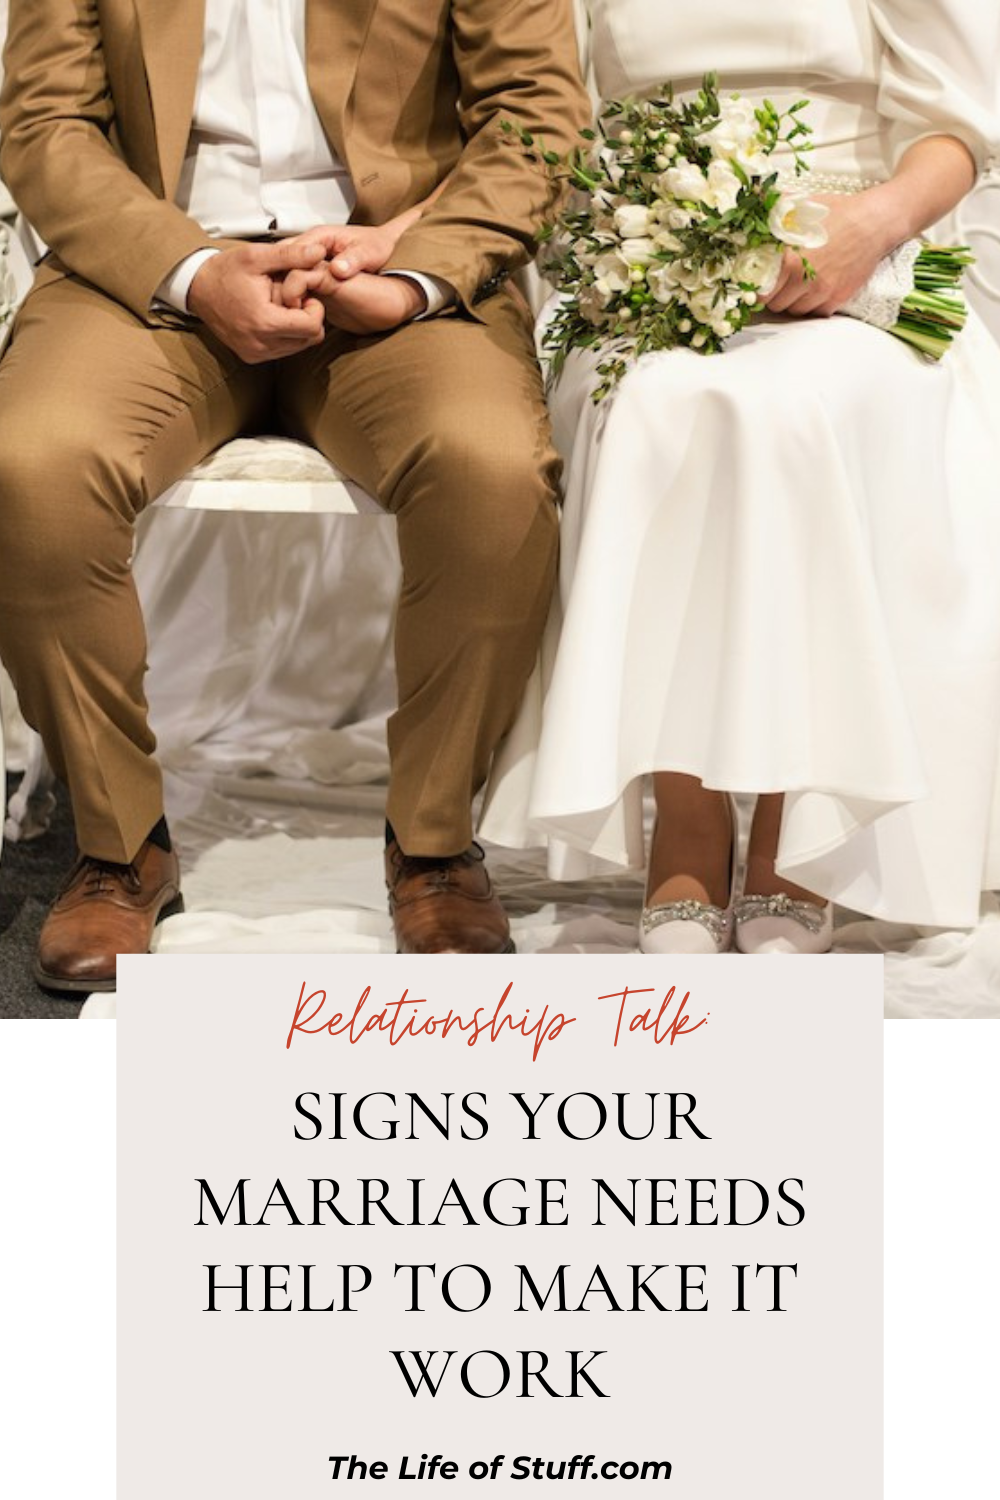 Signs Your Marriage Needs Help to Make it Work - The Life of Stuff